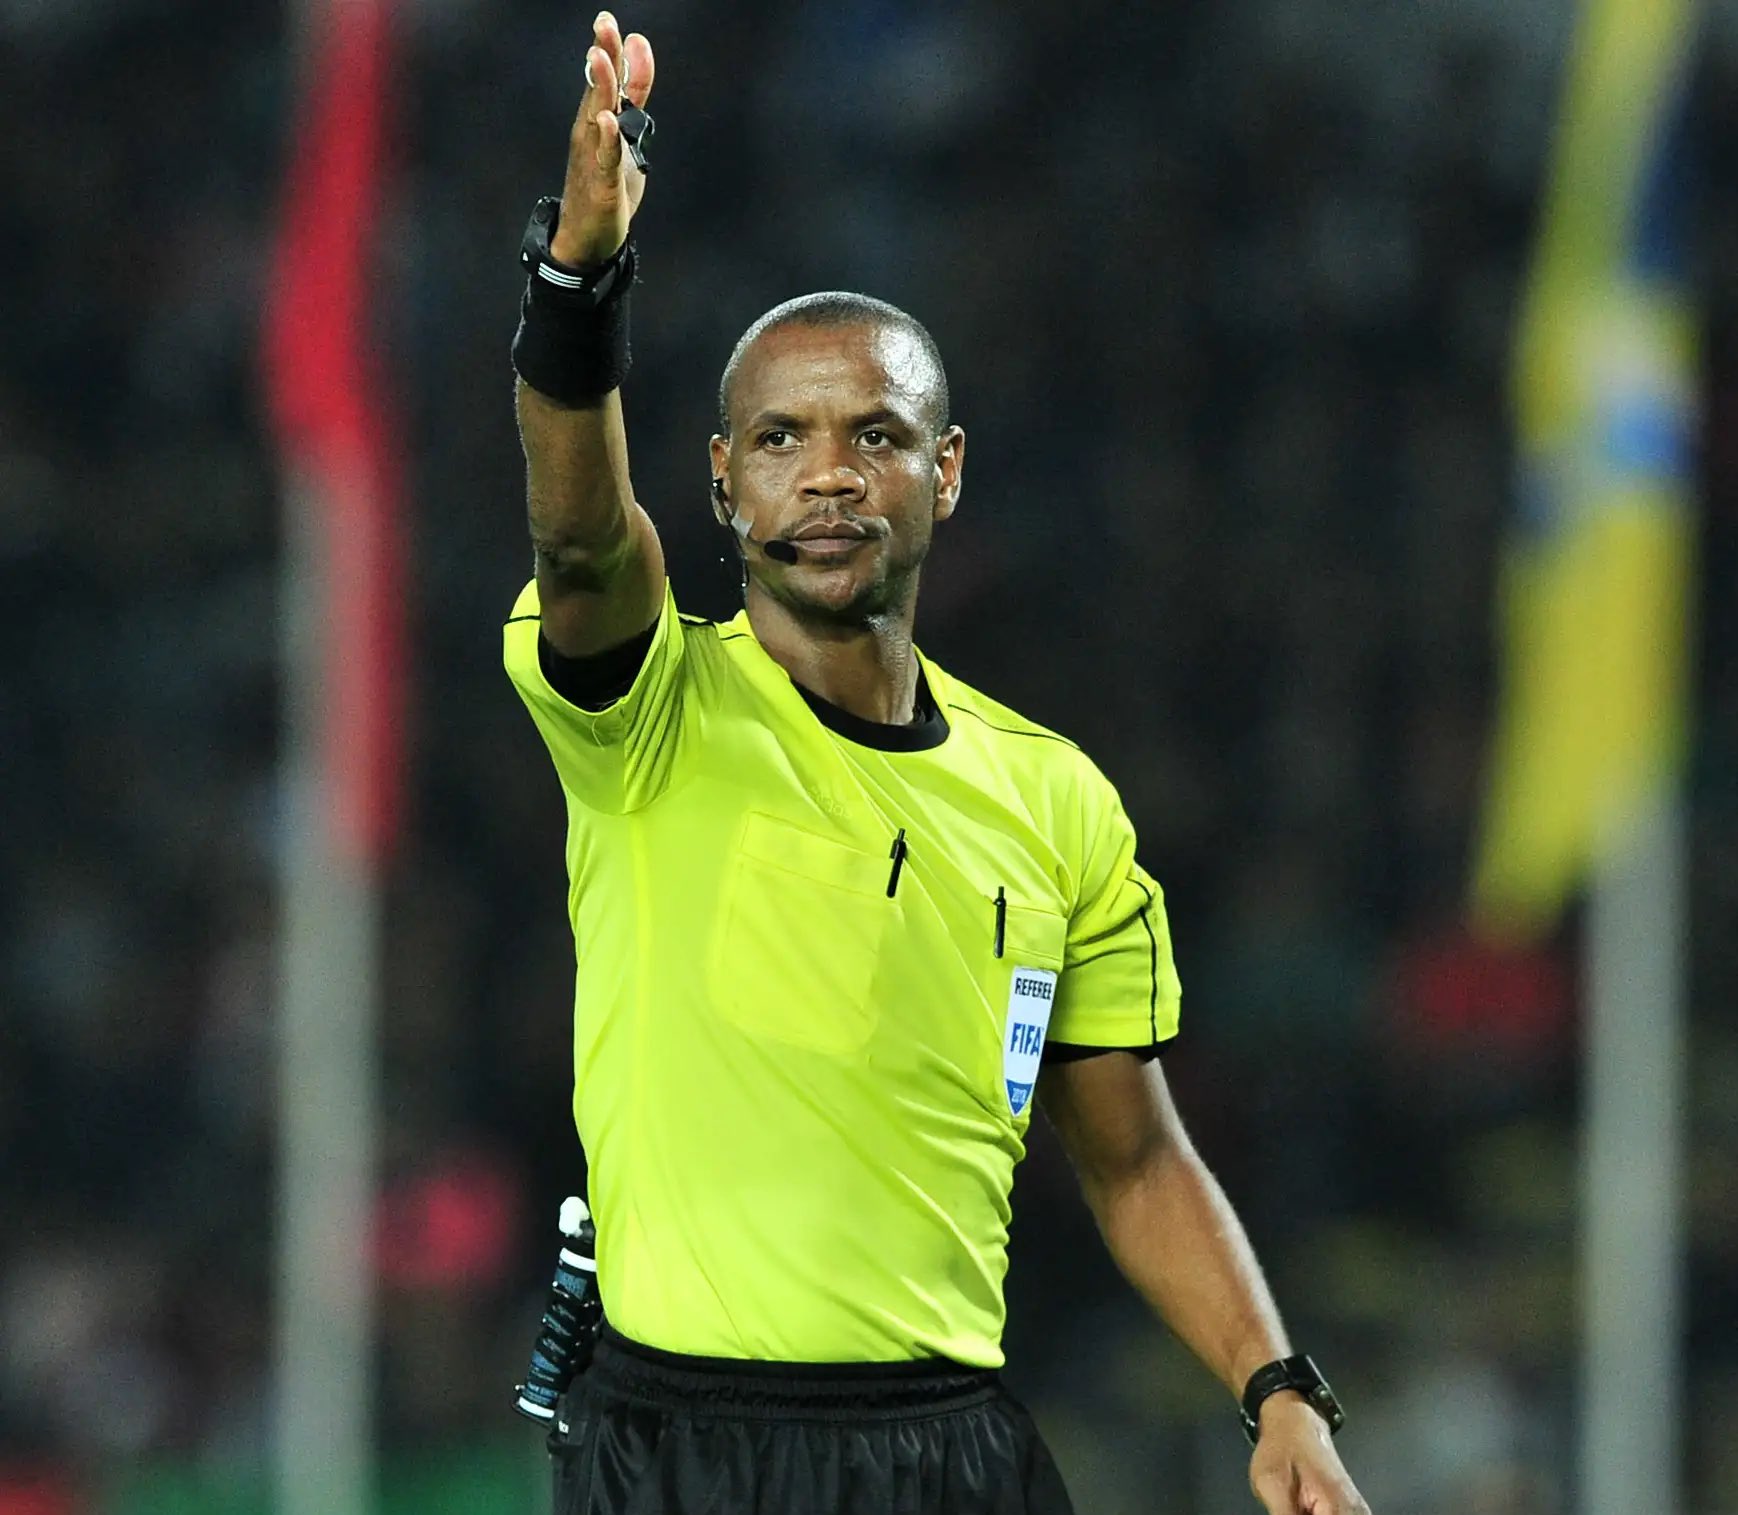 Africa Facts Zone On November 18 This Referee Janny Sikazwe Was Suspended By The Caf Disciplinary Board On Suspicion Of Corruption The Suspicion Arose From The Way He Officiated